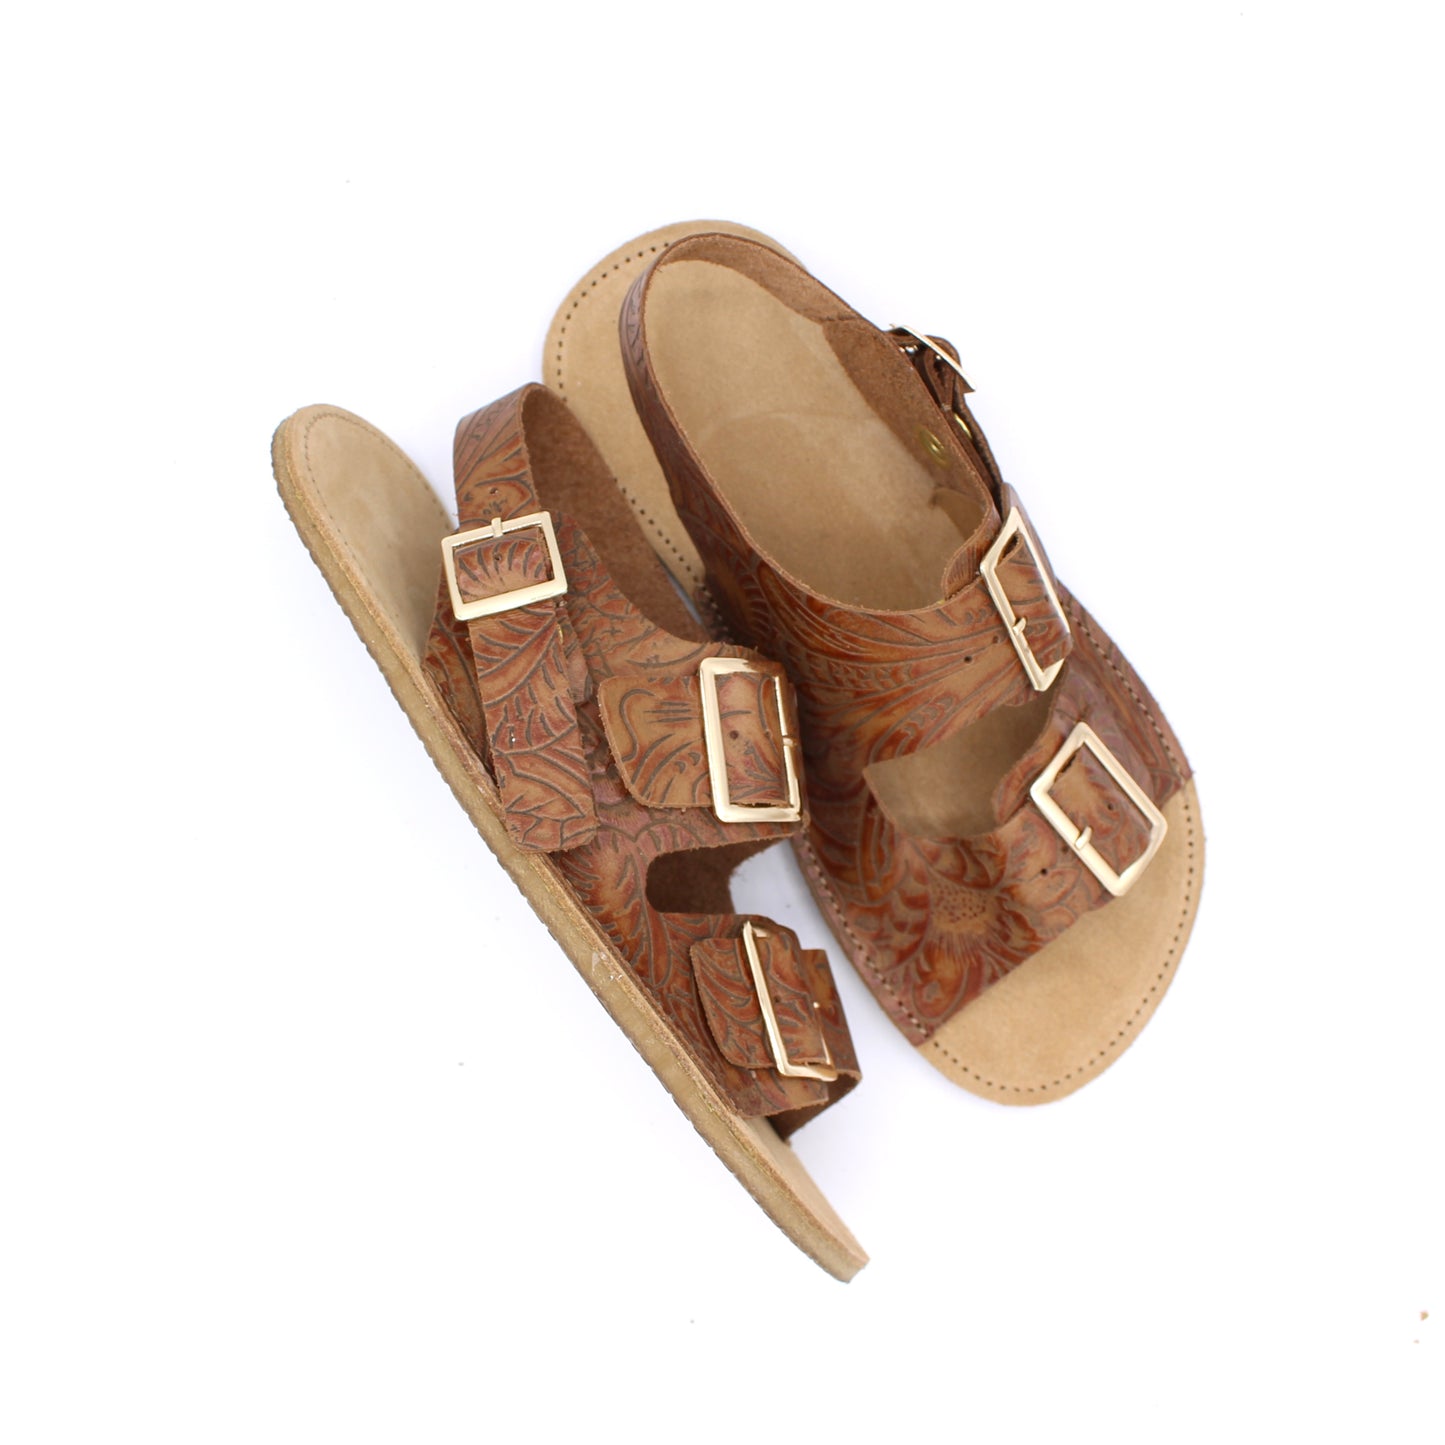 Ladies Buckle Sandals  - TOOLED WALNUT - -Gold Buckles - 6mm Caramel Hybrid Soles - Snaps